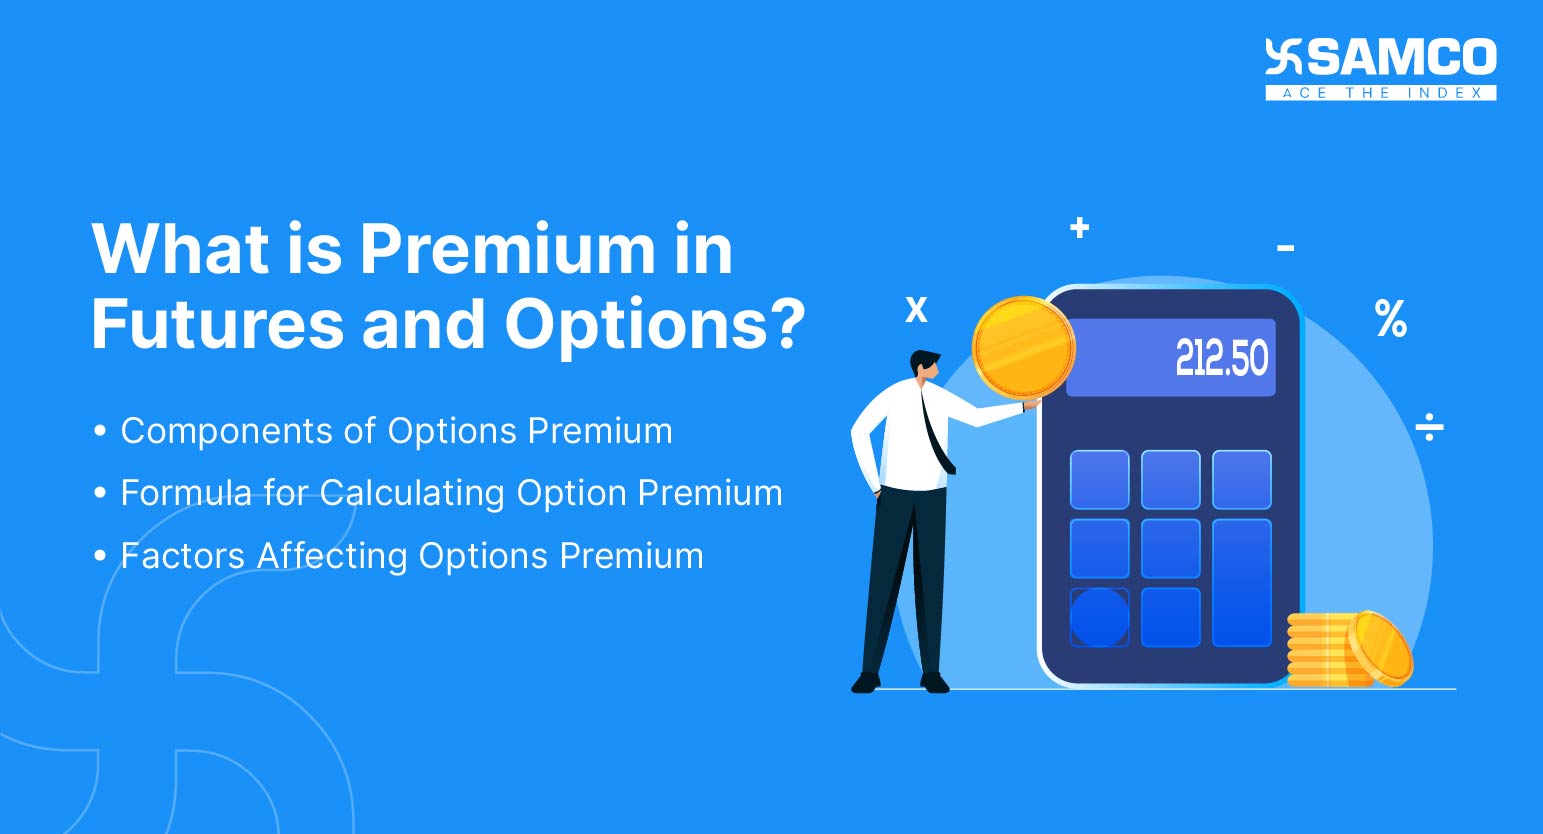 What is Premium in Futures and Options